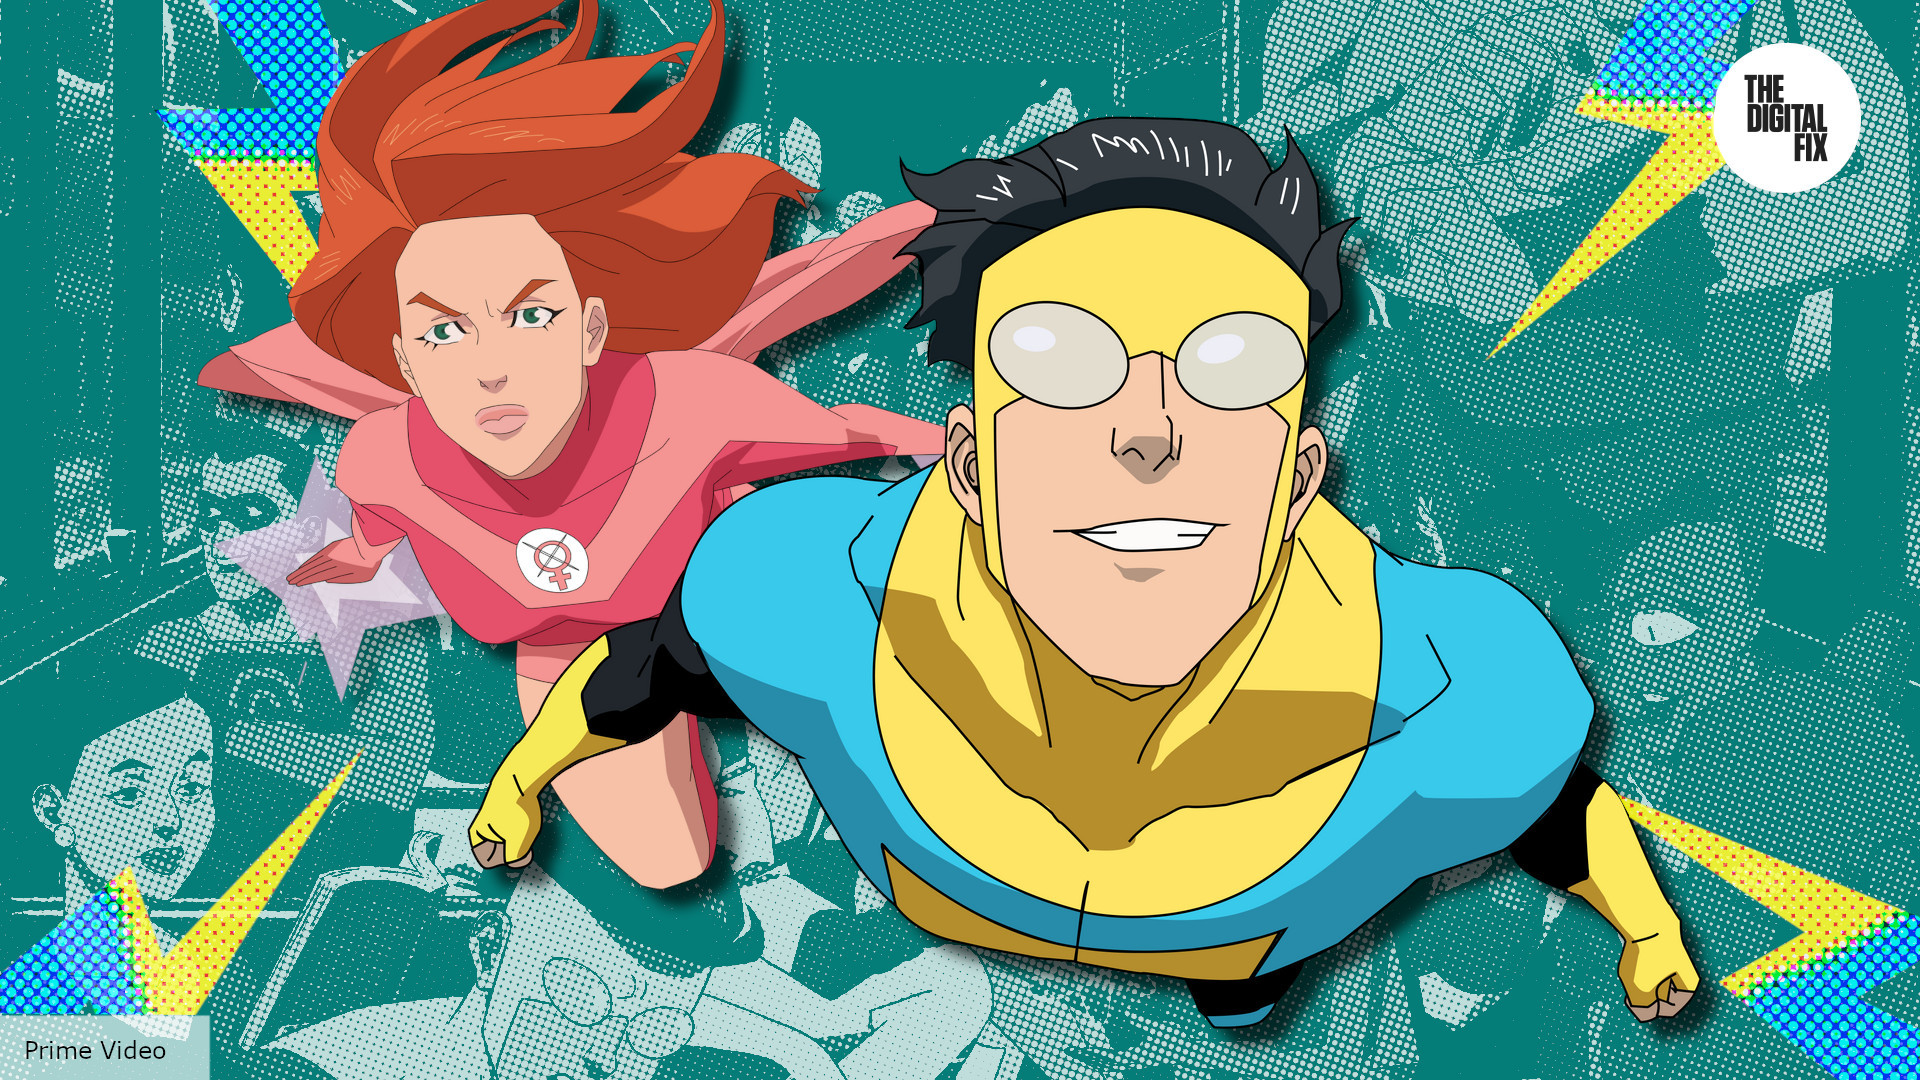 Invincible' Season 2 Arrives With Perfect Scores Ahead Of Its Release Date